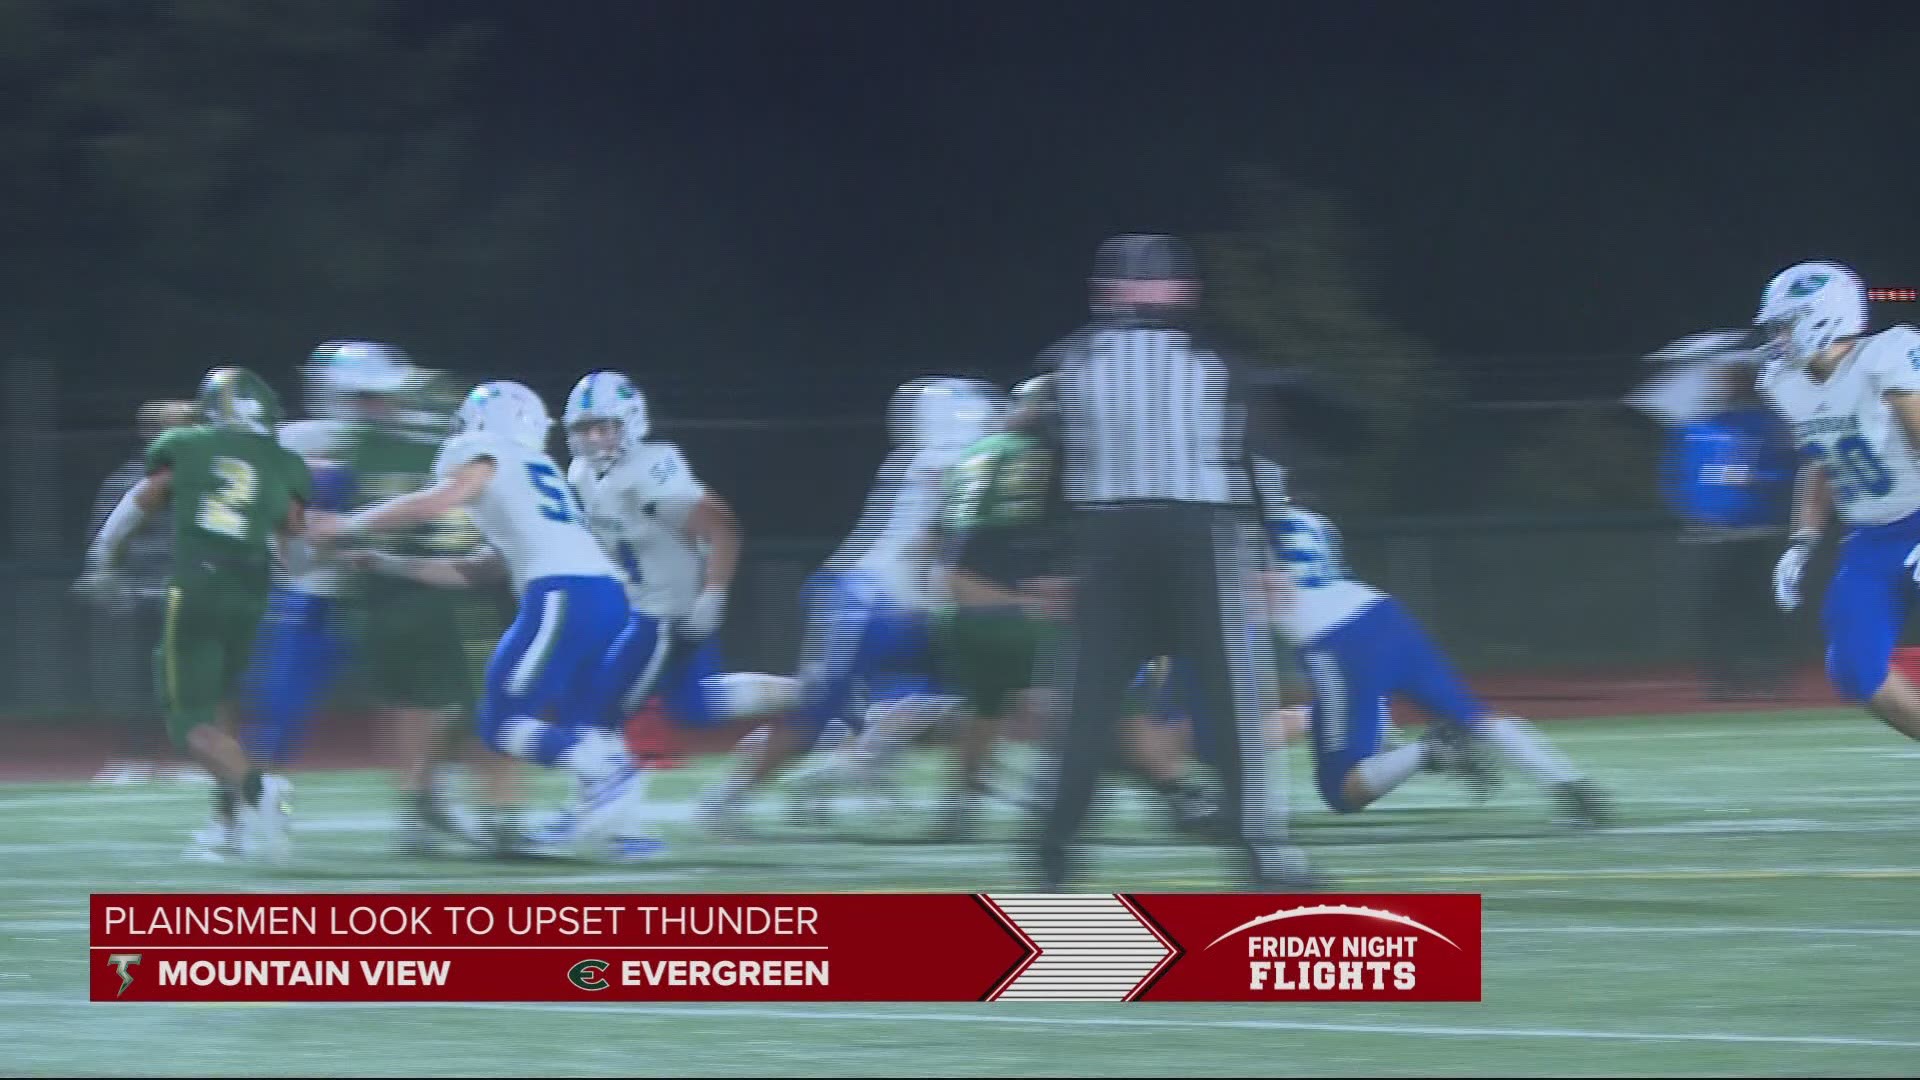 Highlights of Evergreen's 40-35 win over Mountain View. Highlights are part of KGW's Friday Night Flights with Orlando Sanchez.